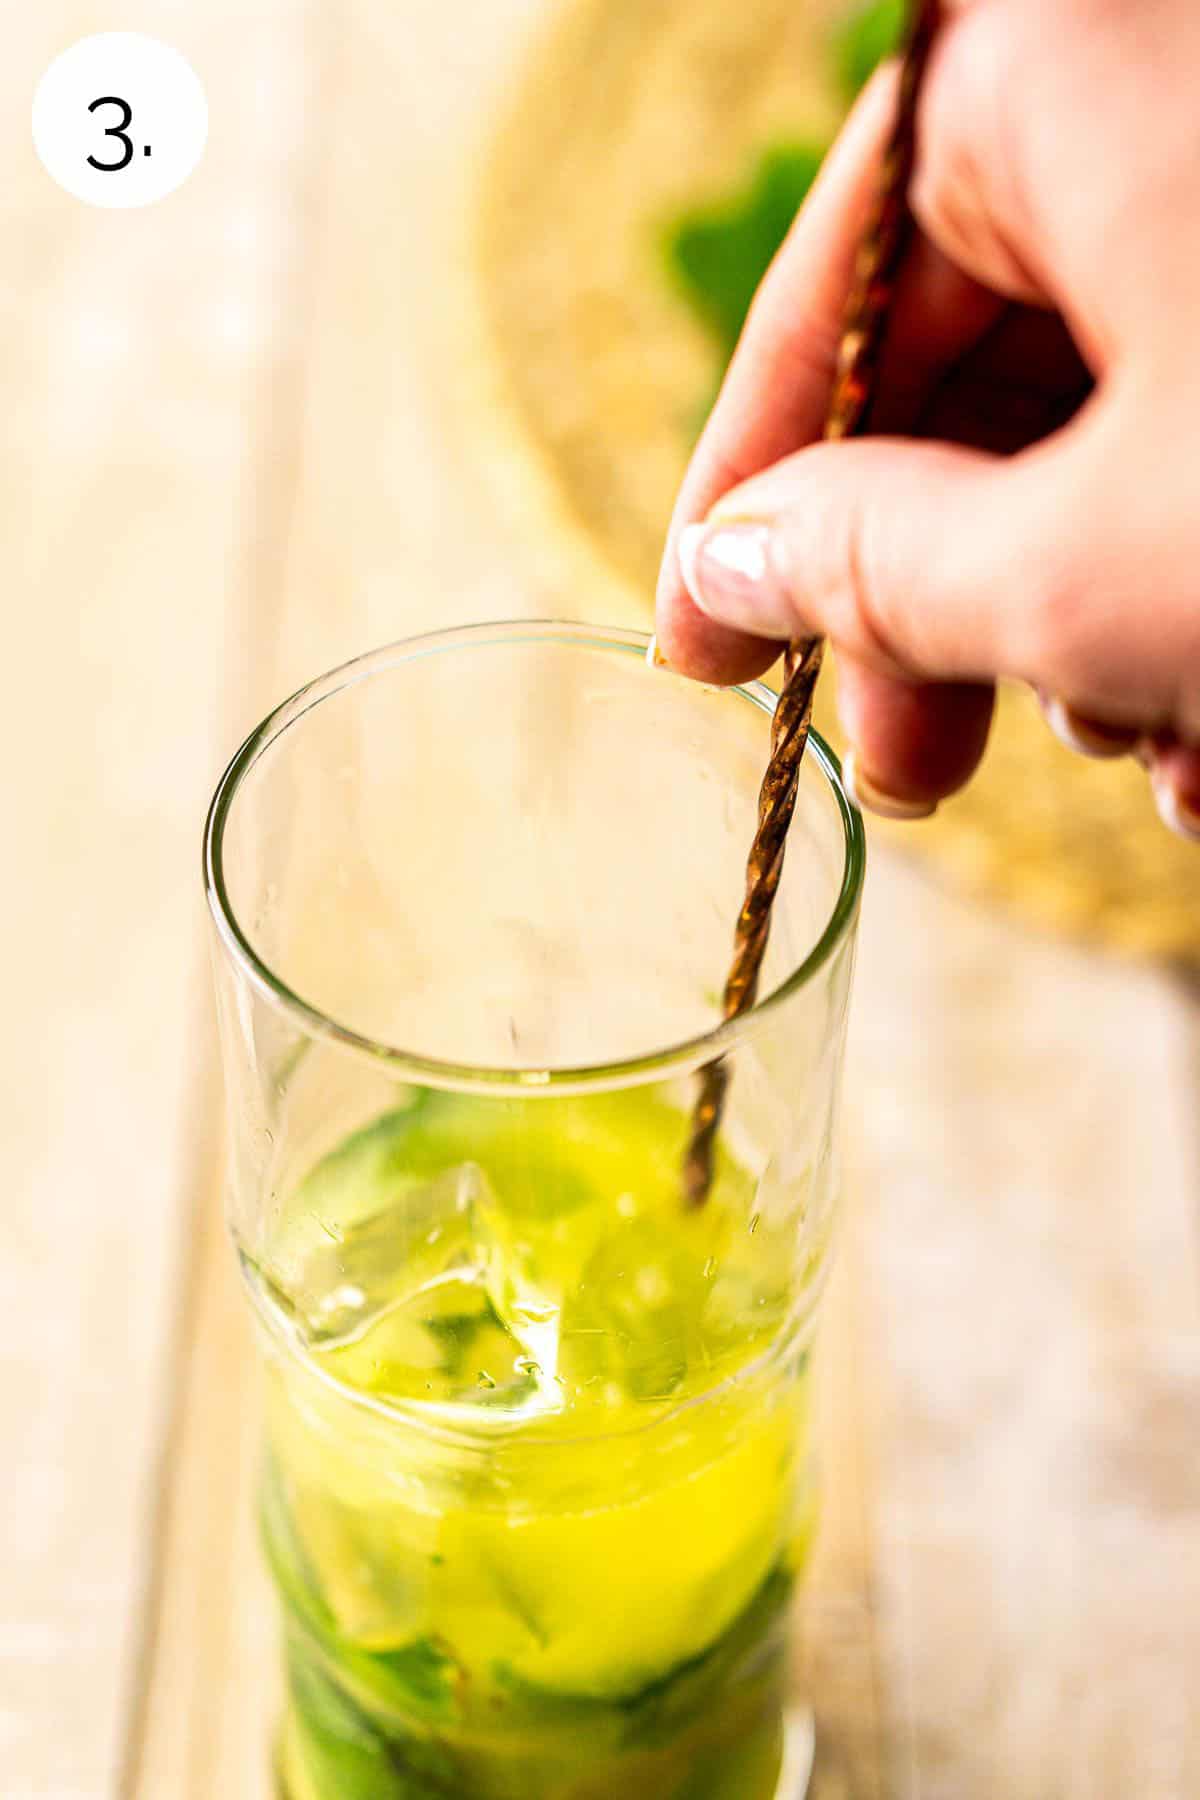 A hand stirring a copper bar spoon to mix in the white rum and ice in a tall highball glass on a cream-colored surface.